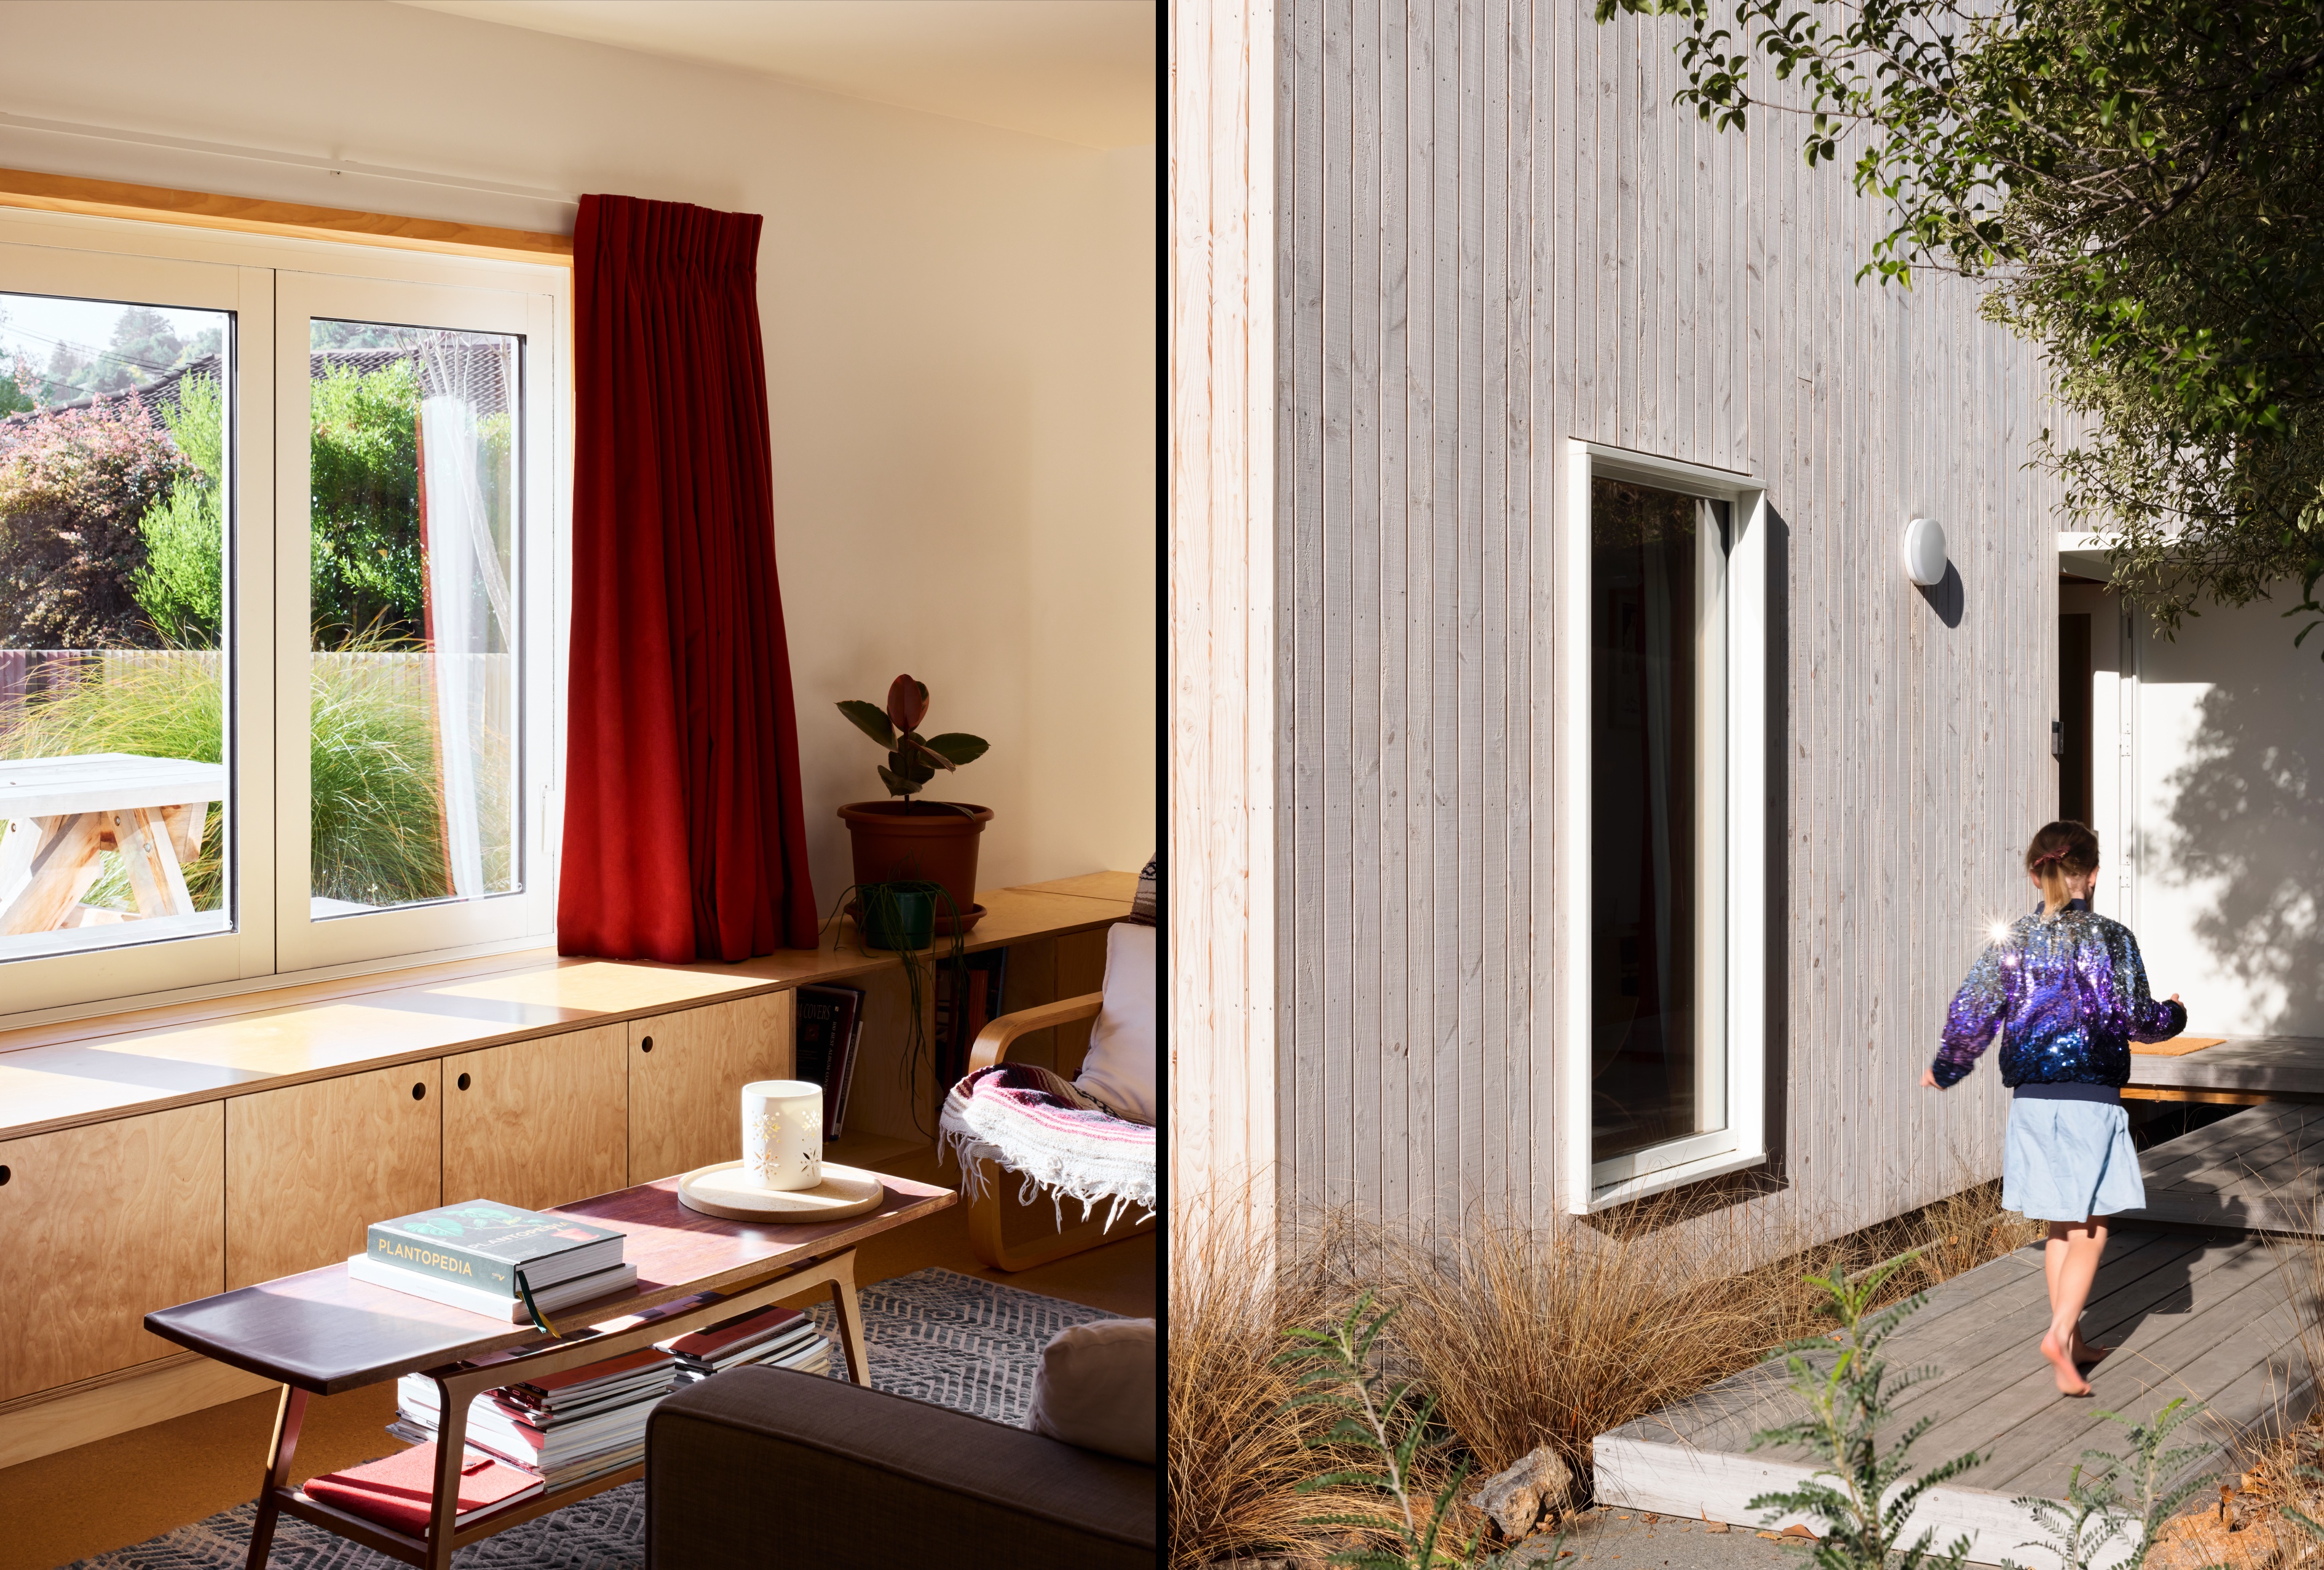 Split image. Left side shows living space with natural timber cabinets, cork flooring, and light streaming through double-glazed windows. Right side is exterior depicting Douglas fir cladding and double-glazed aluminium joinery.